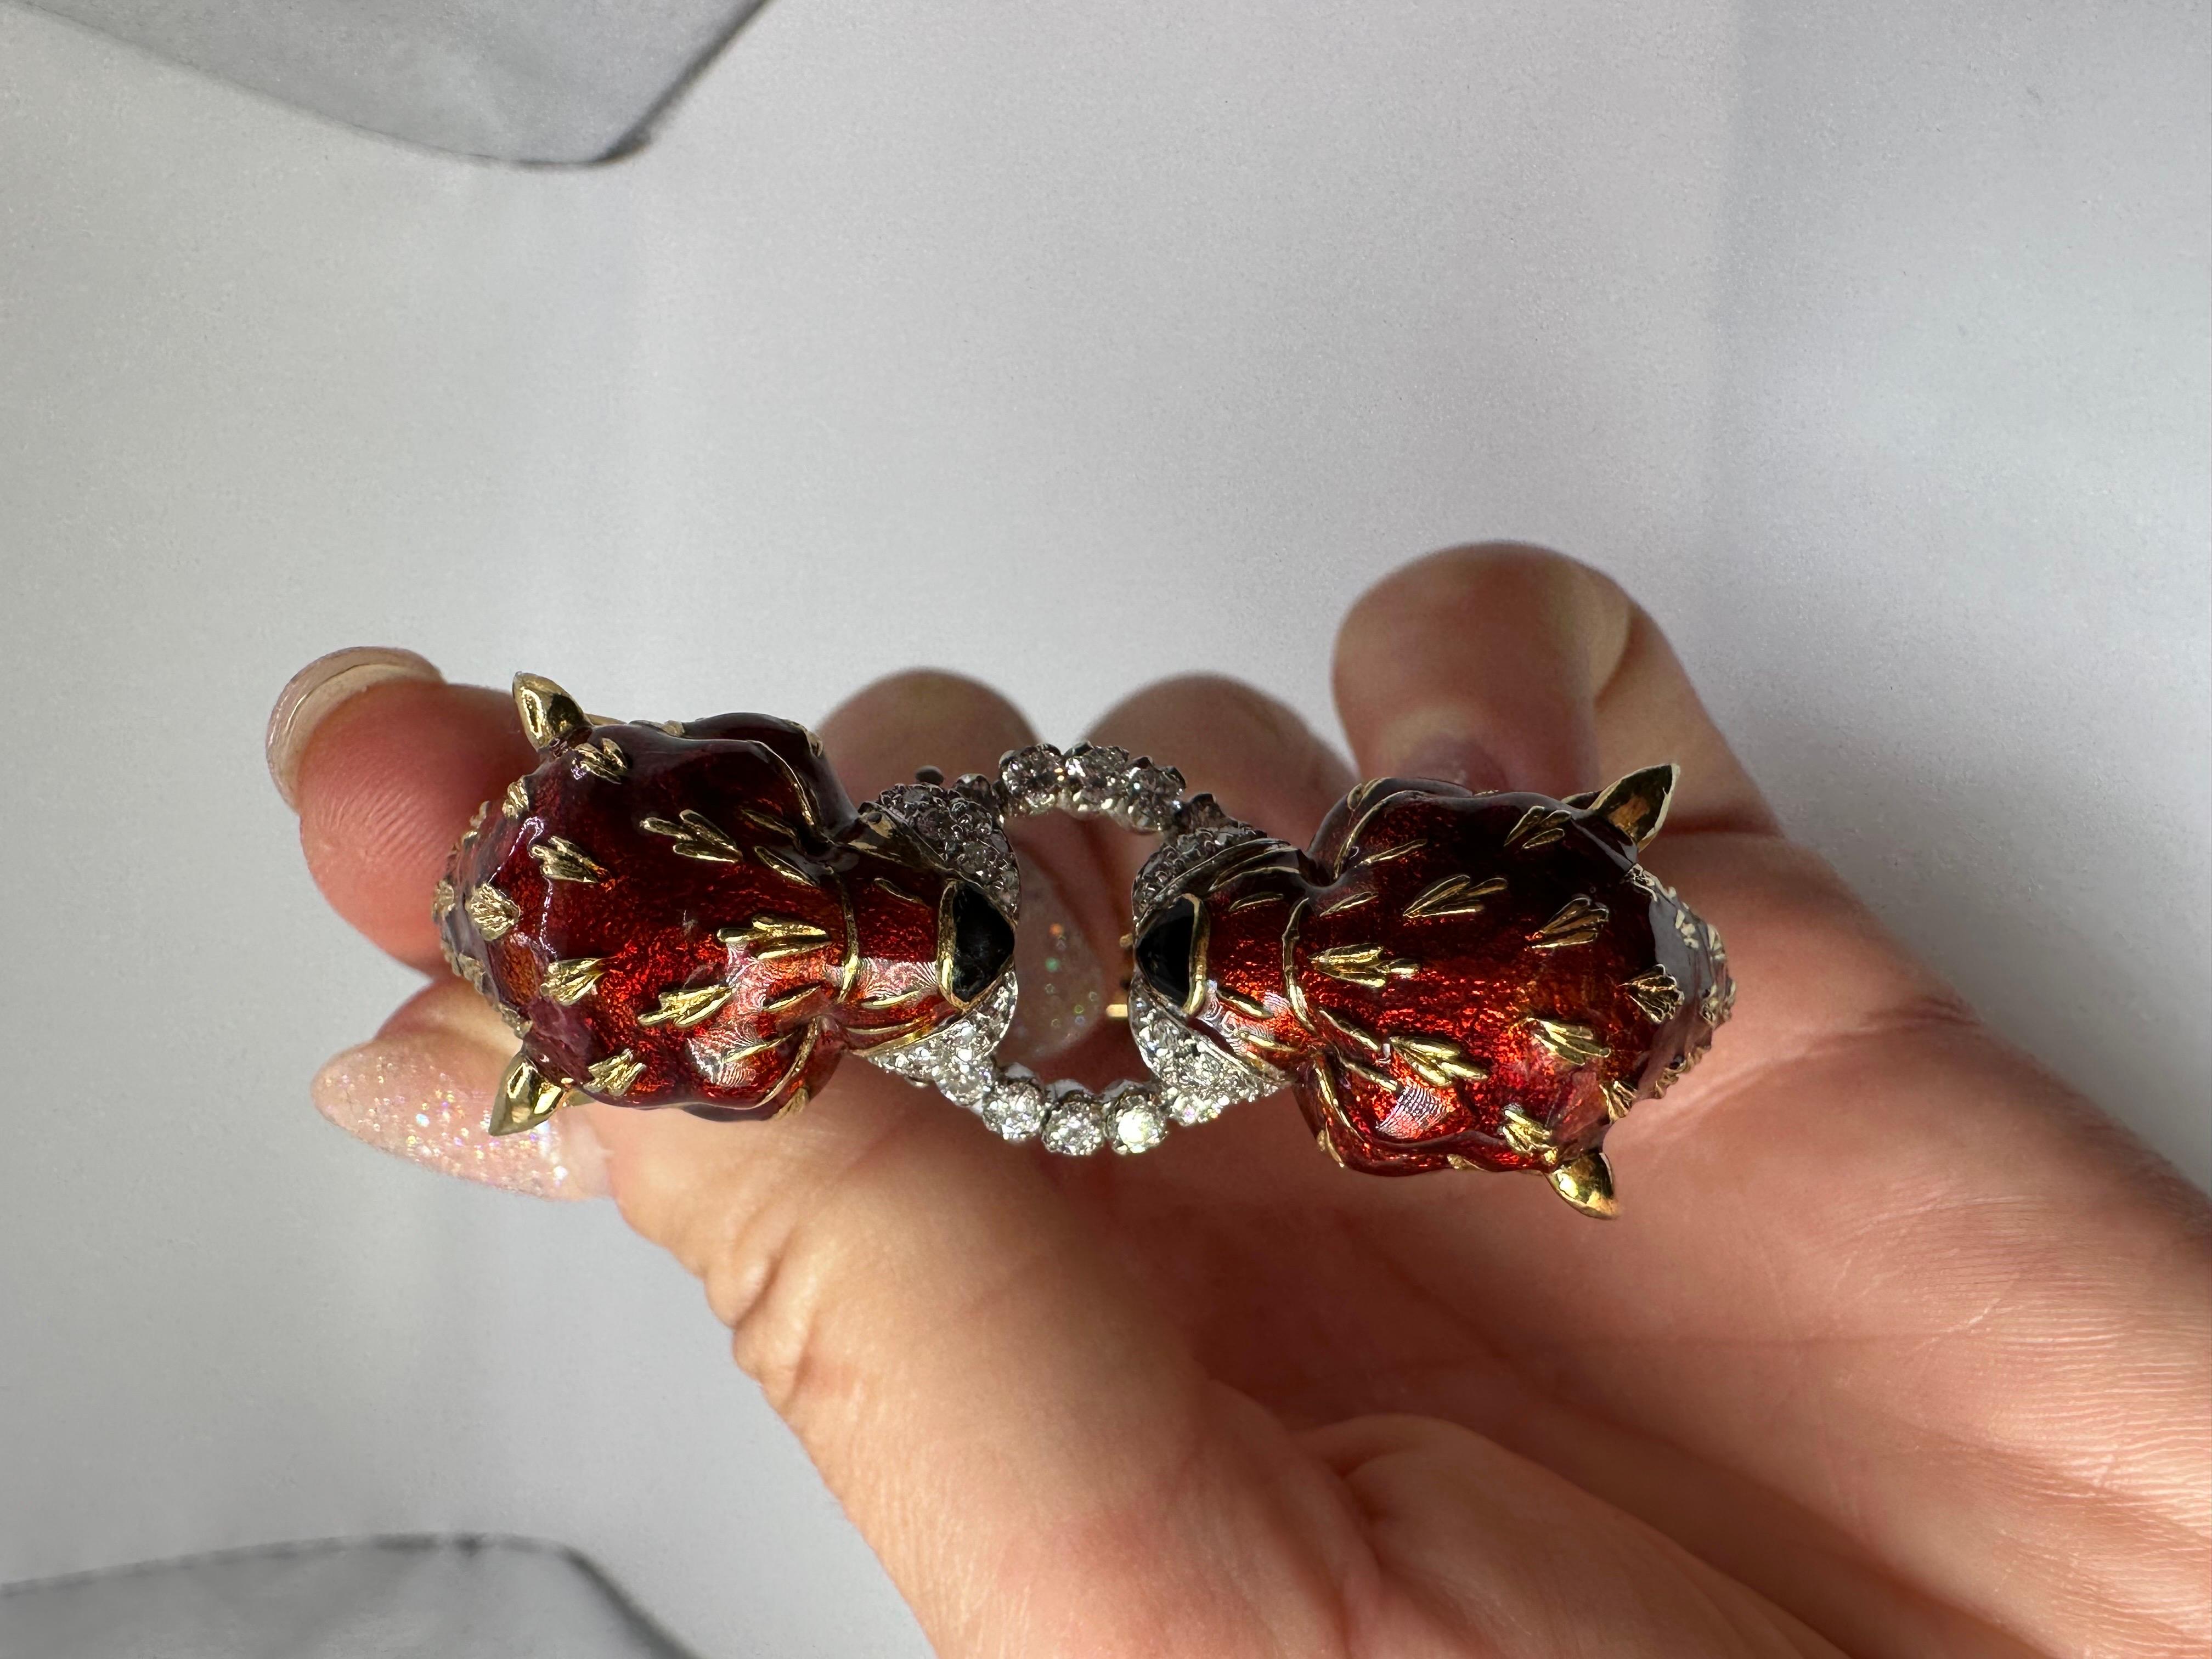 Frascarolo famous tiger bracelet 100% authentic, made with VS diamonds and outsanding enamel work. Please look at all photos, there is a small place on the bracelet where enamel is slightly discolored otherwise the bangle bracelet is in excellent